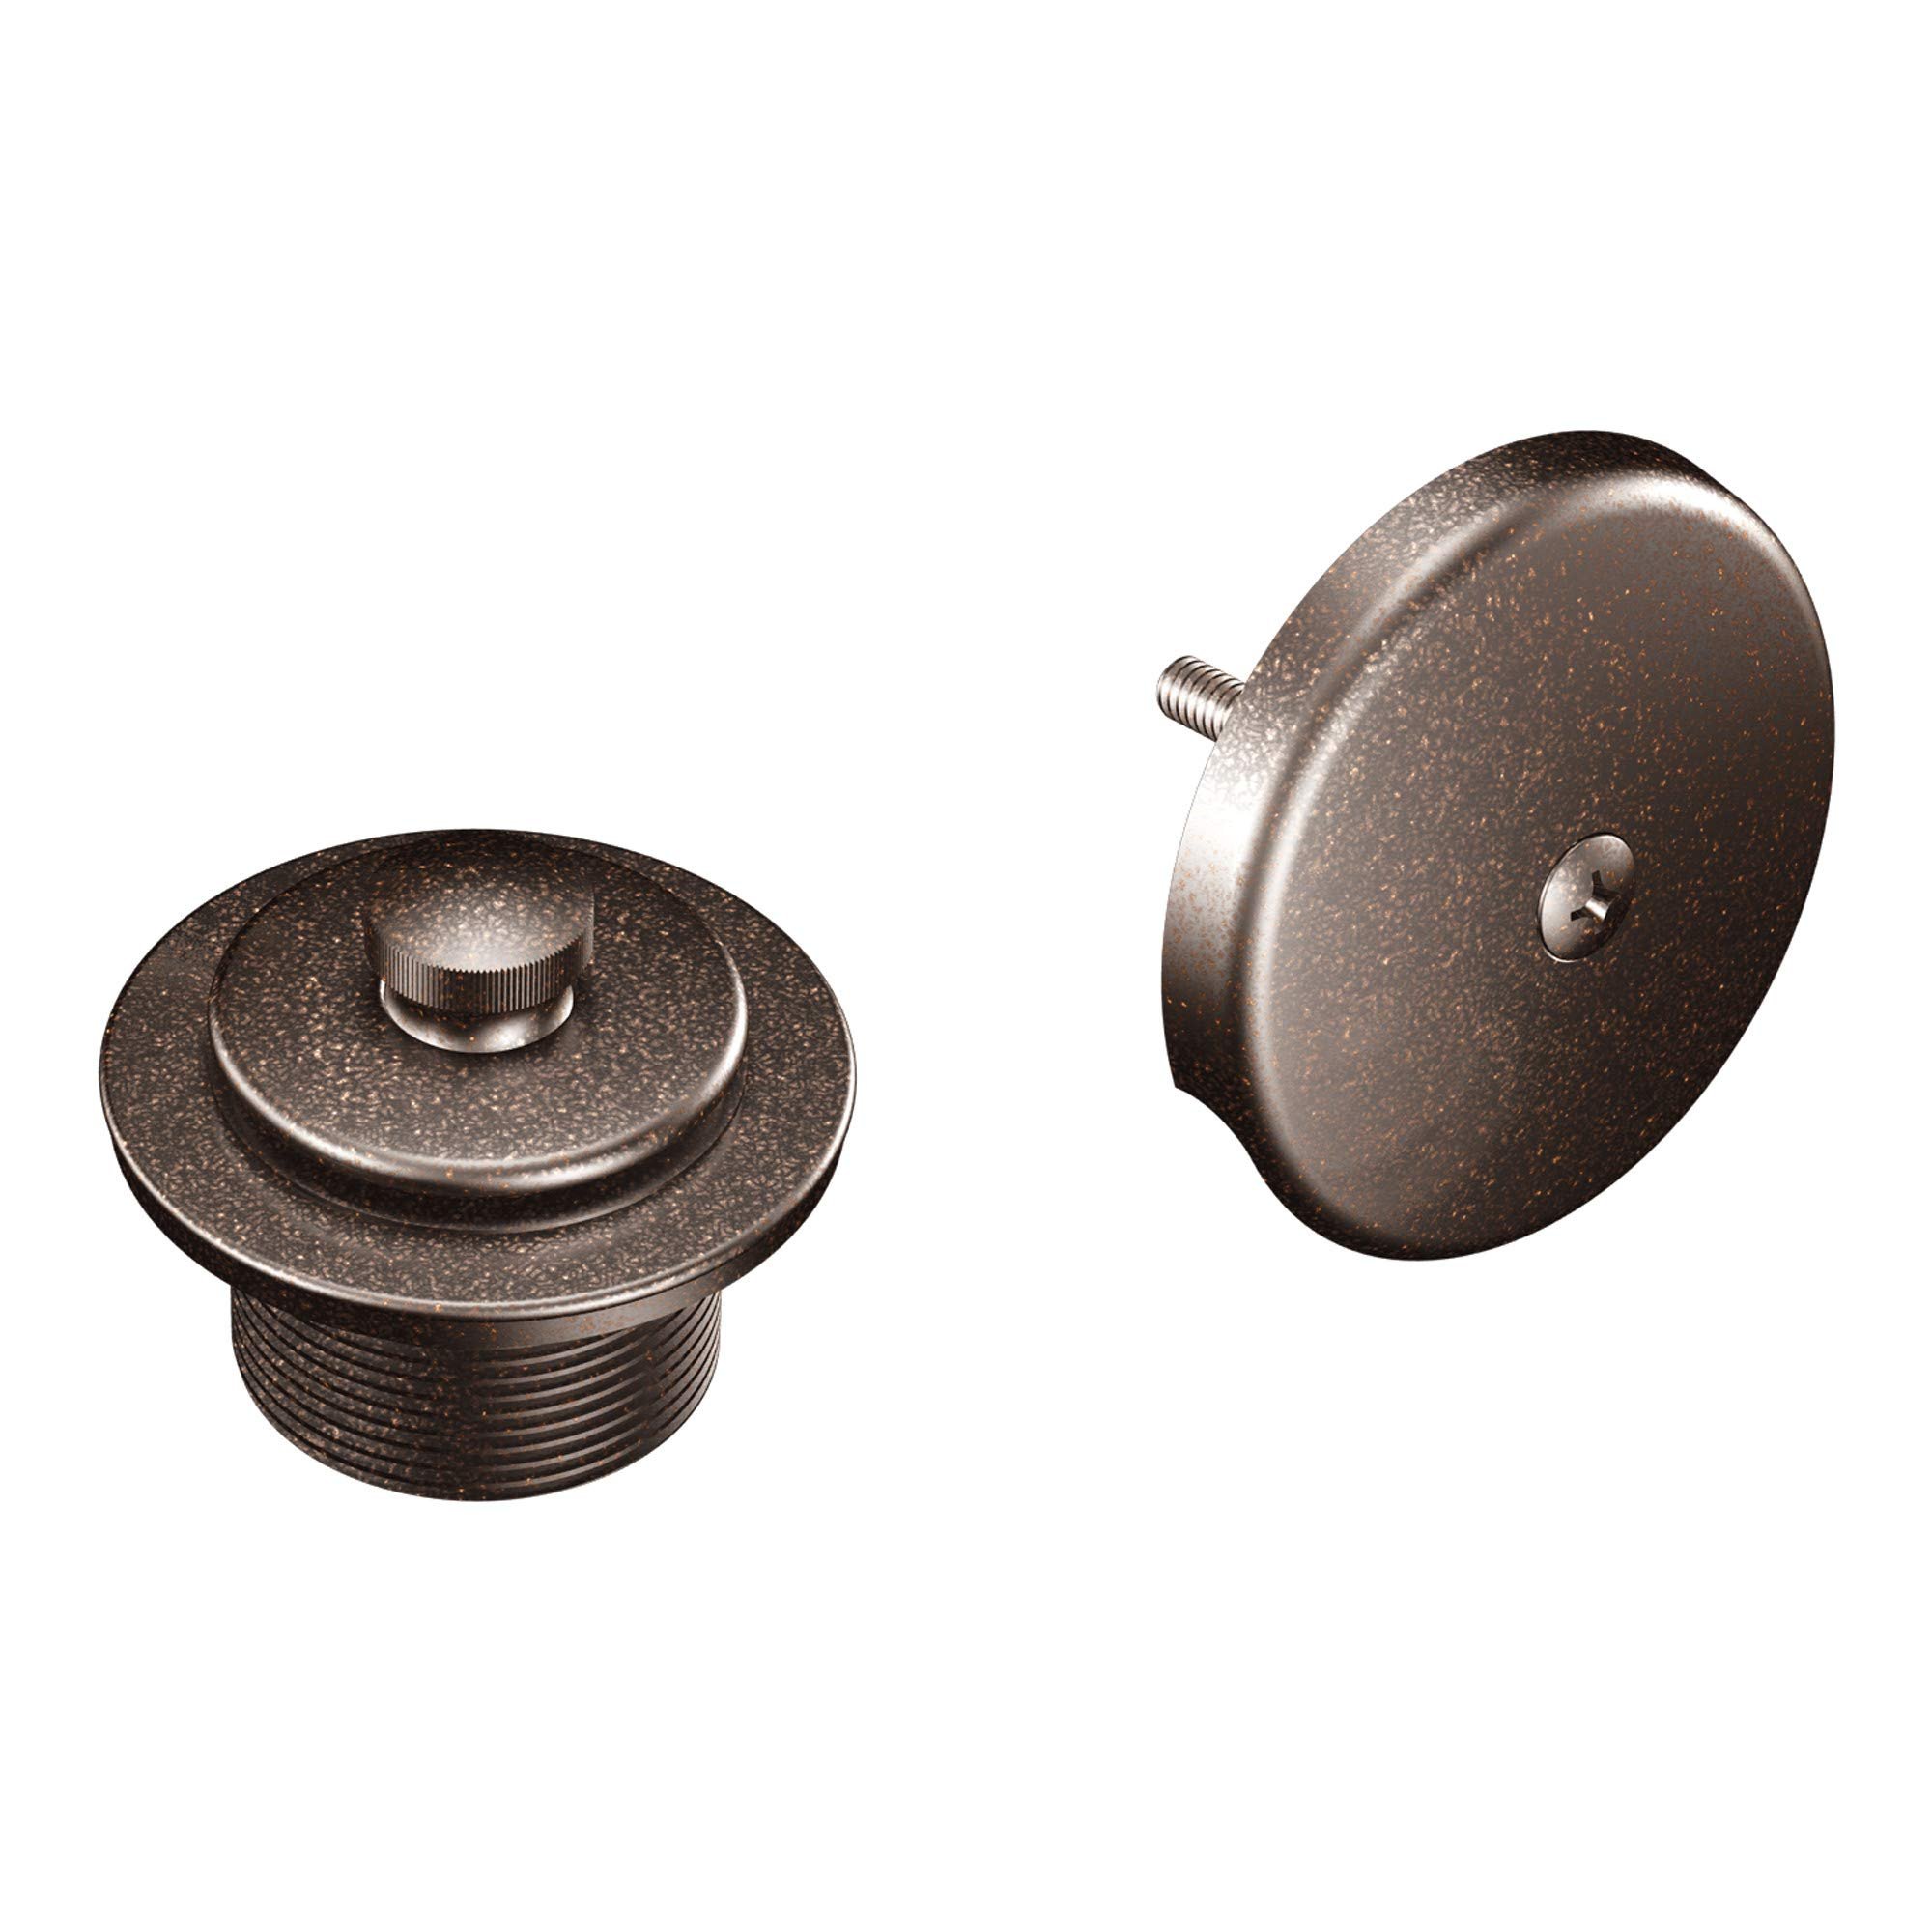 Book Cover Moen T90331ORB Push-N-Lock Tub and Shower Drain Kit with 1-1/2 Inch Threads, Oil-Rubbed Bronze, 1.5